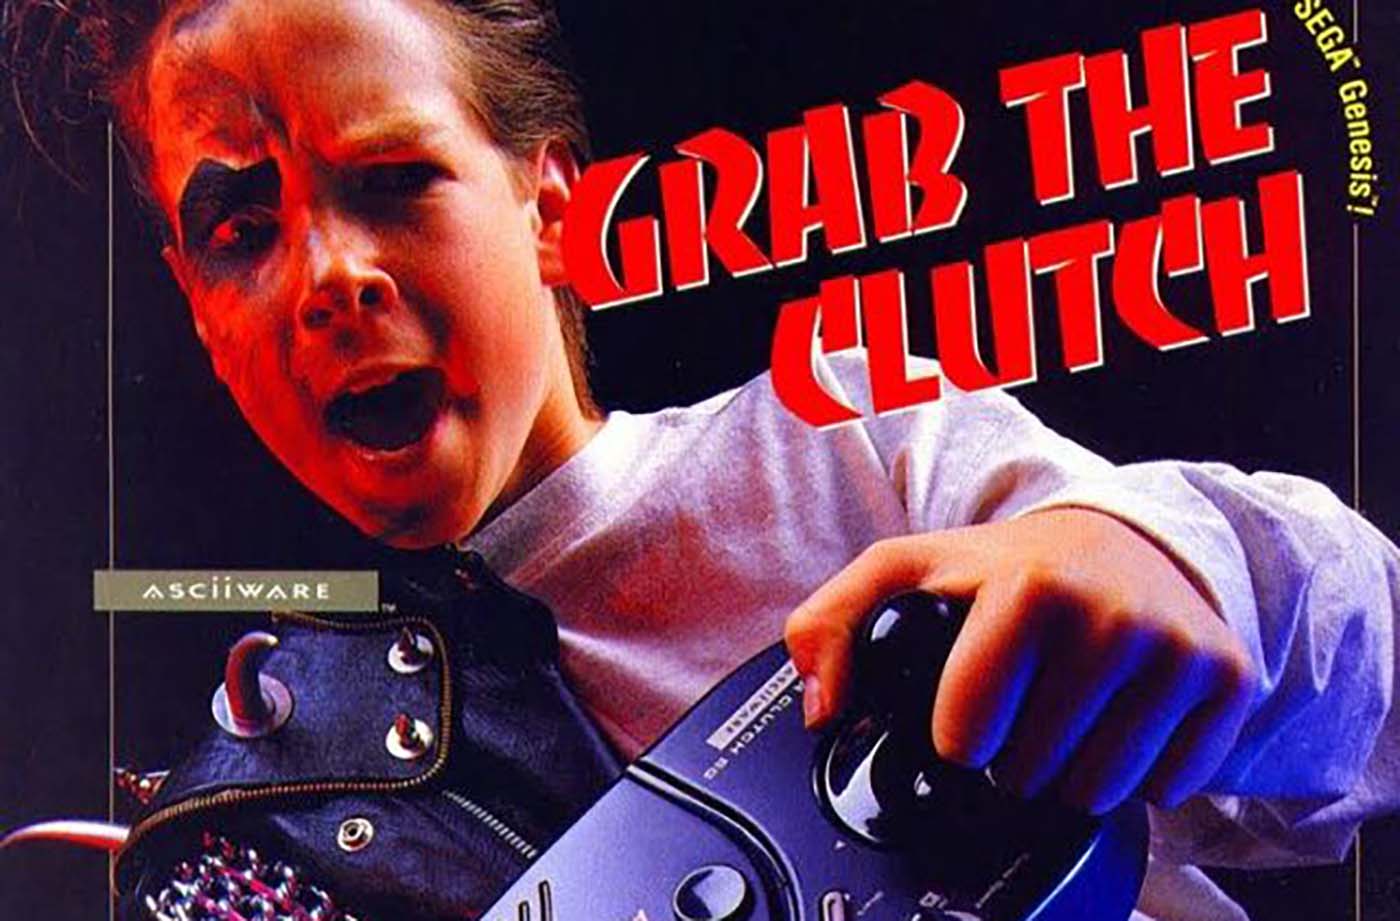 Amazing vintage video game ads from the 1980s and 1990s